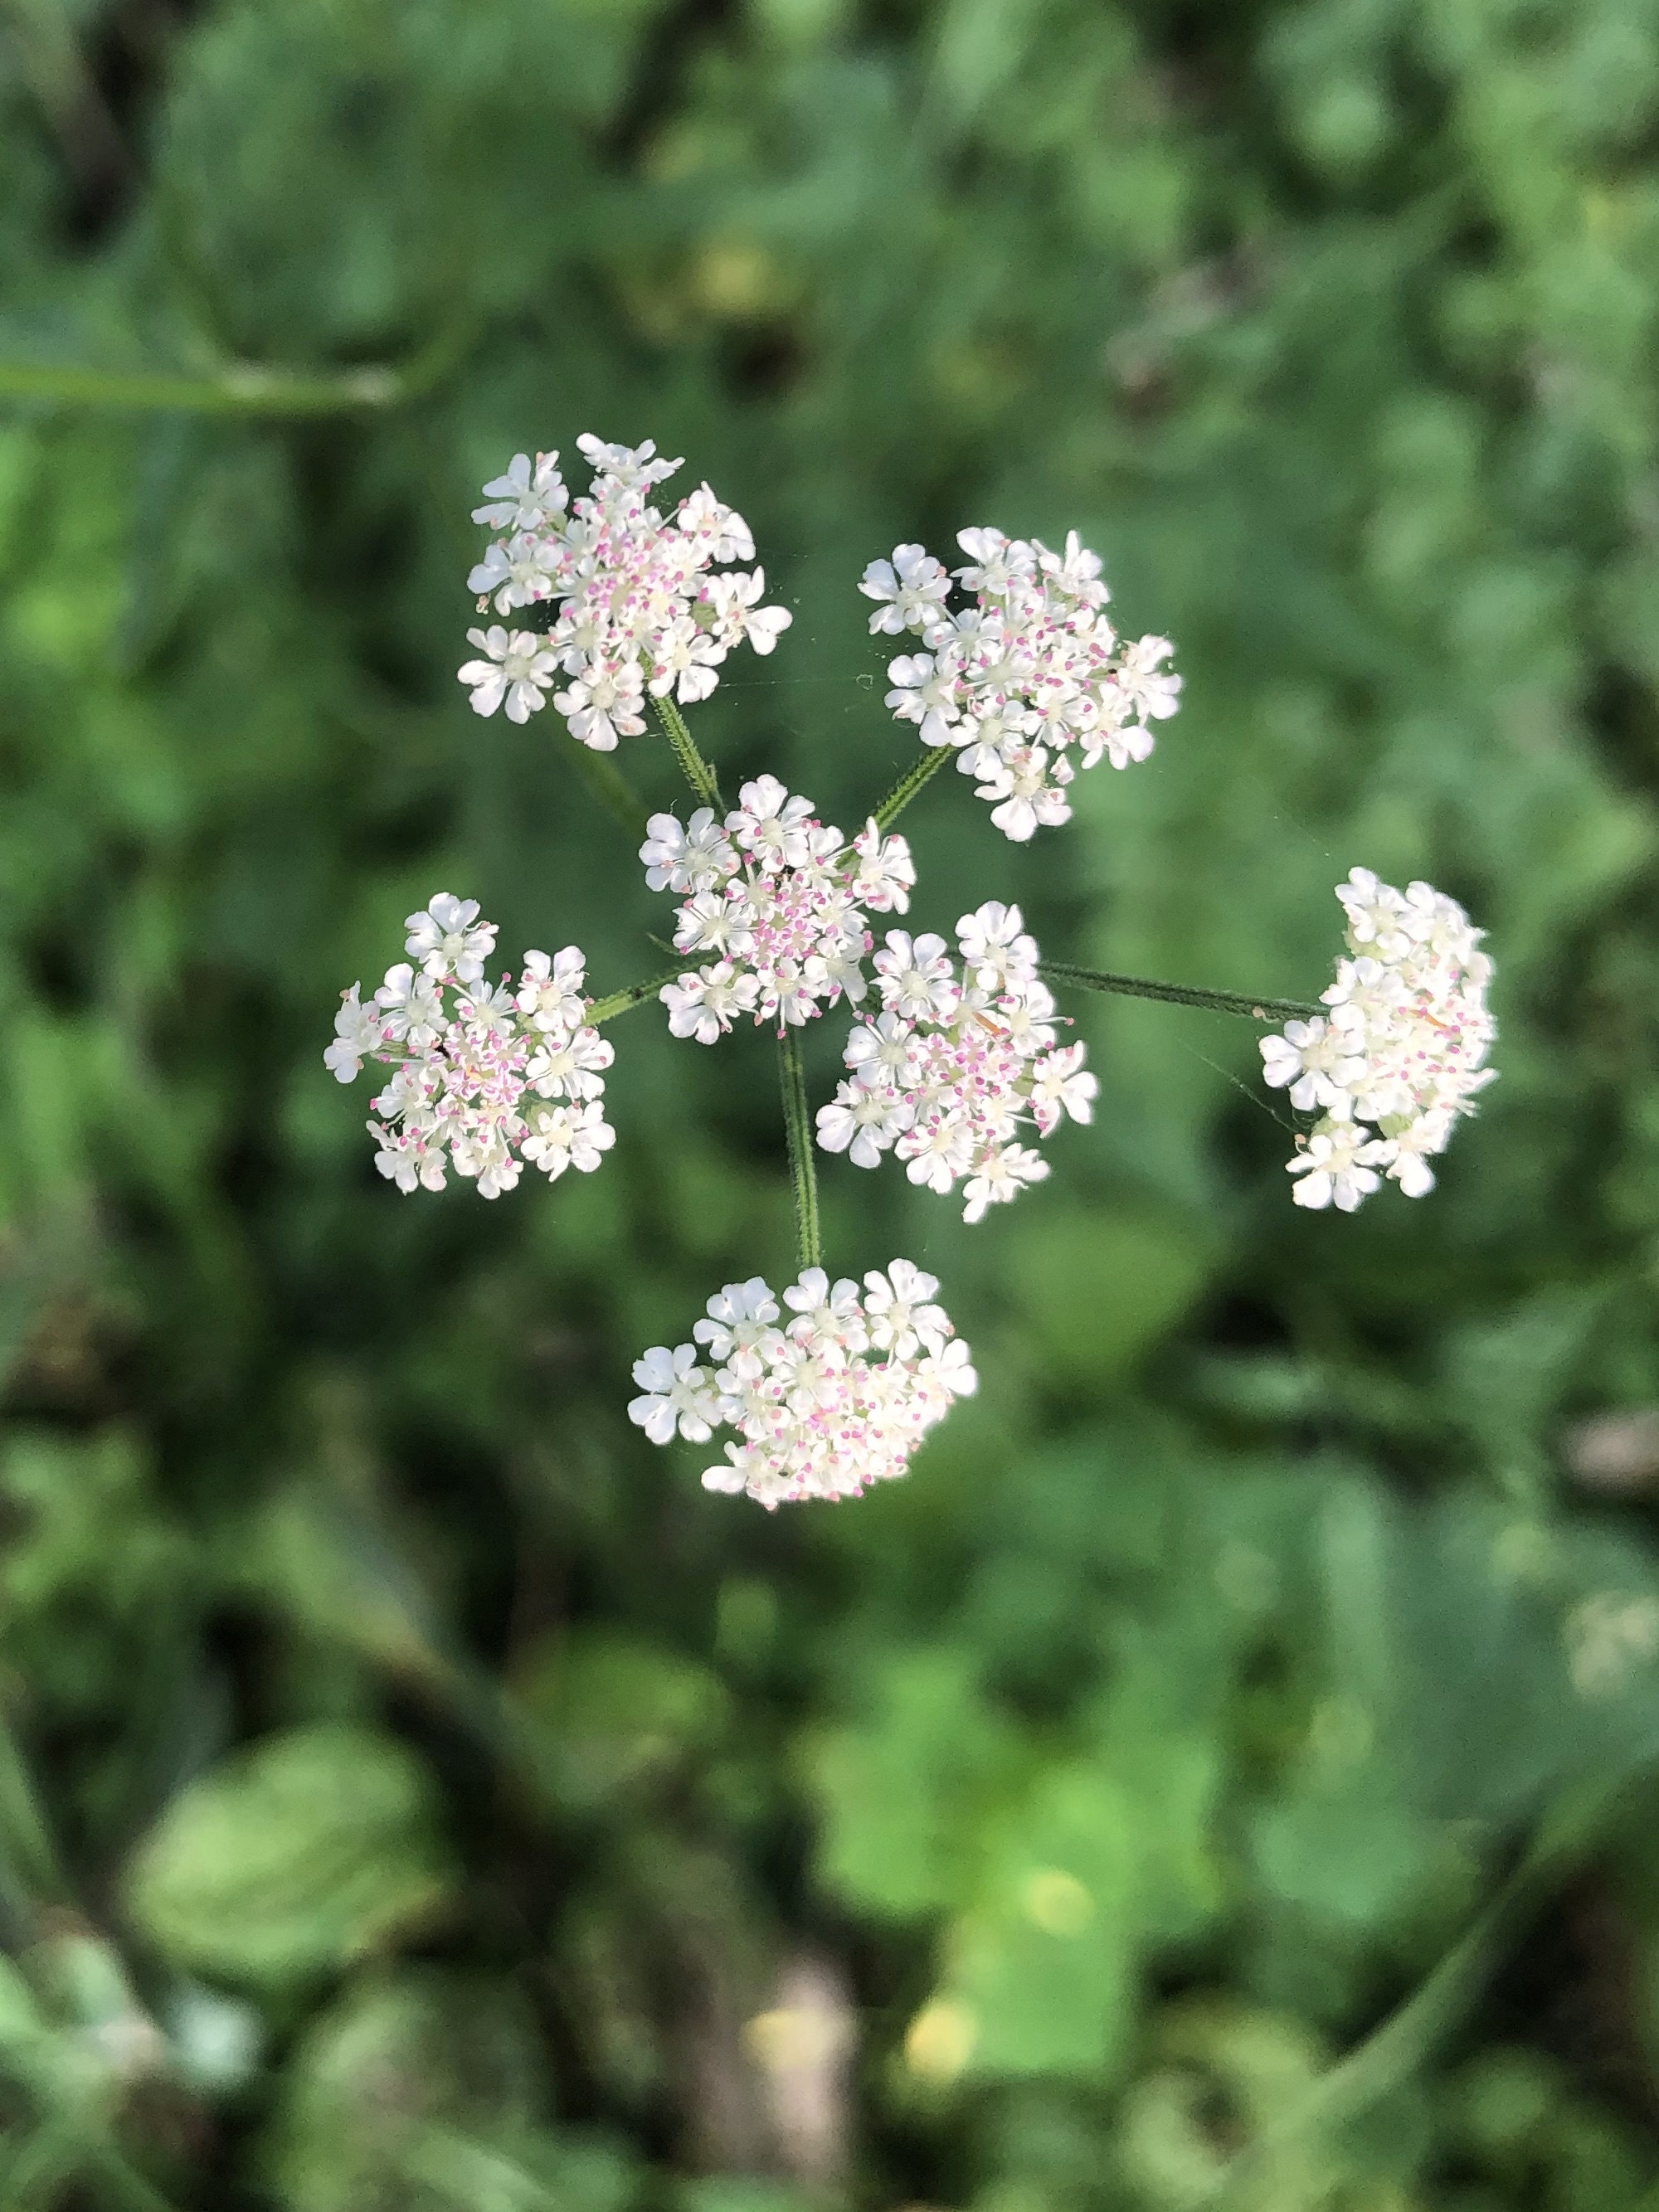 Hedge Parsley in Madison, Wisconsin on July 20, 2022.